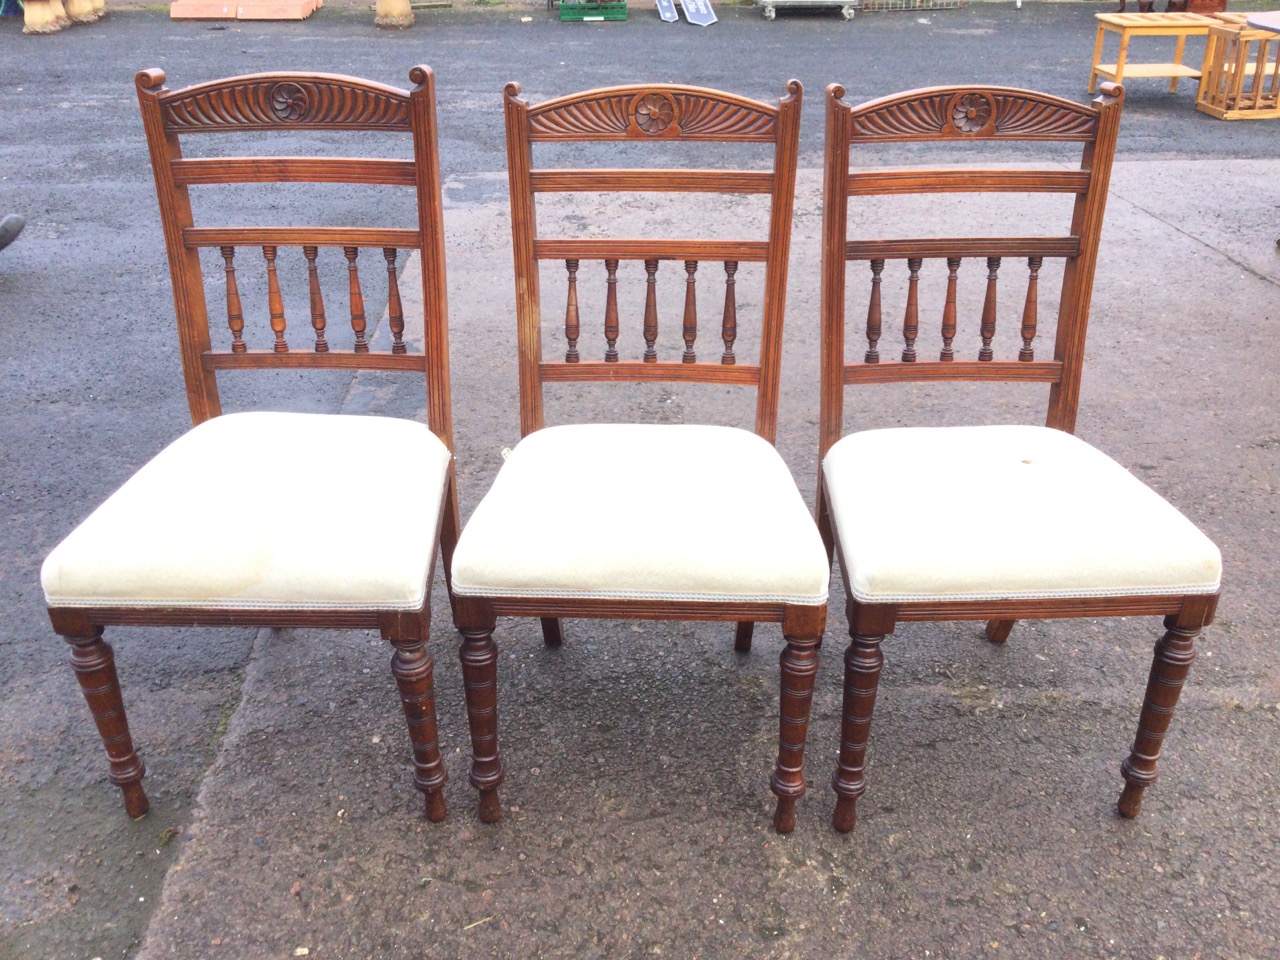 A set of three Edwardian mahogany chairs with arched gadrooned carved backs and central - Image 2 of 3